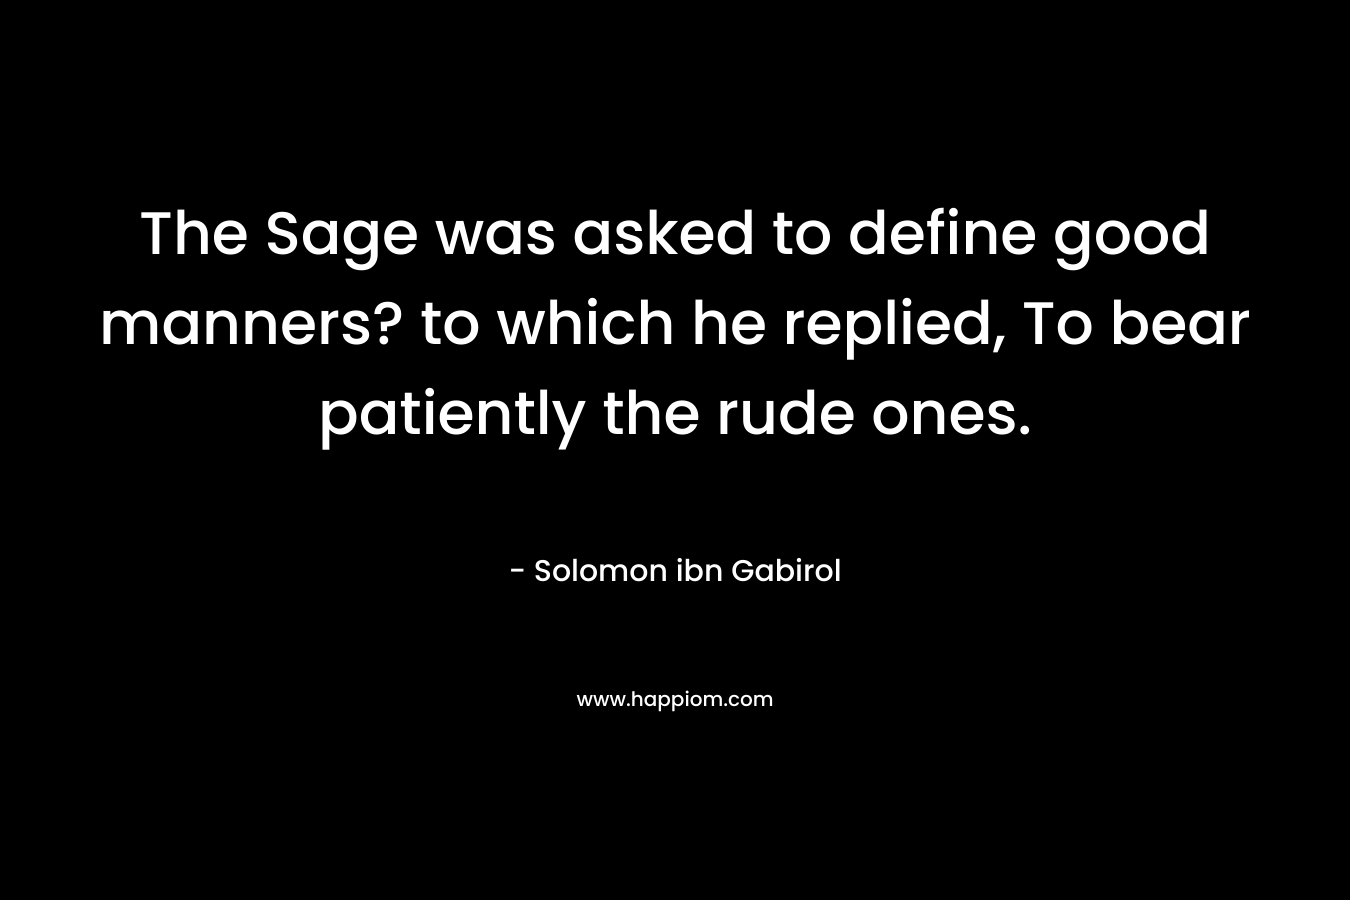 The Sage was asked to define good manners? to which he replied, To bear patiently the rude ones.